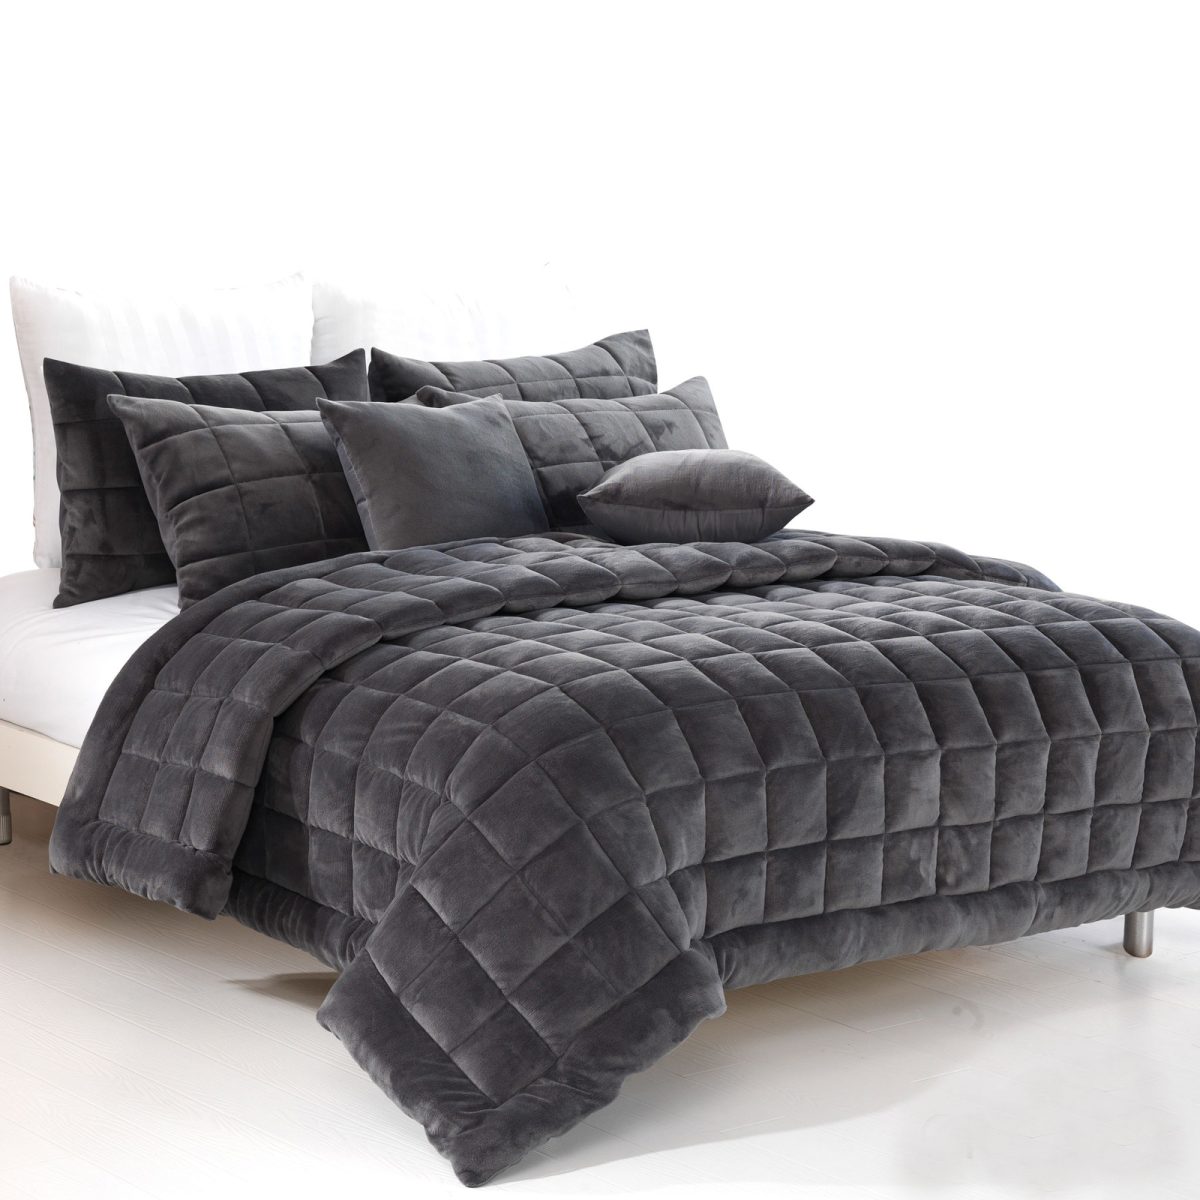 Alastairs Augusta Faux Mink Quilt / Comforter Set Charcoal Single